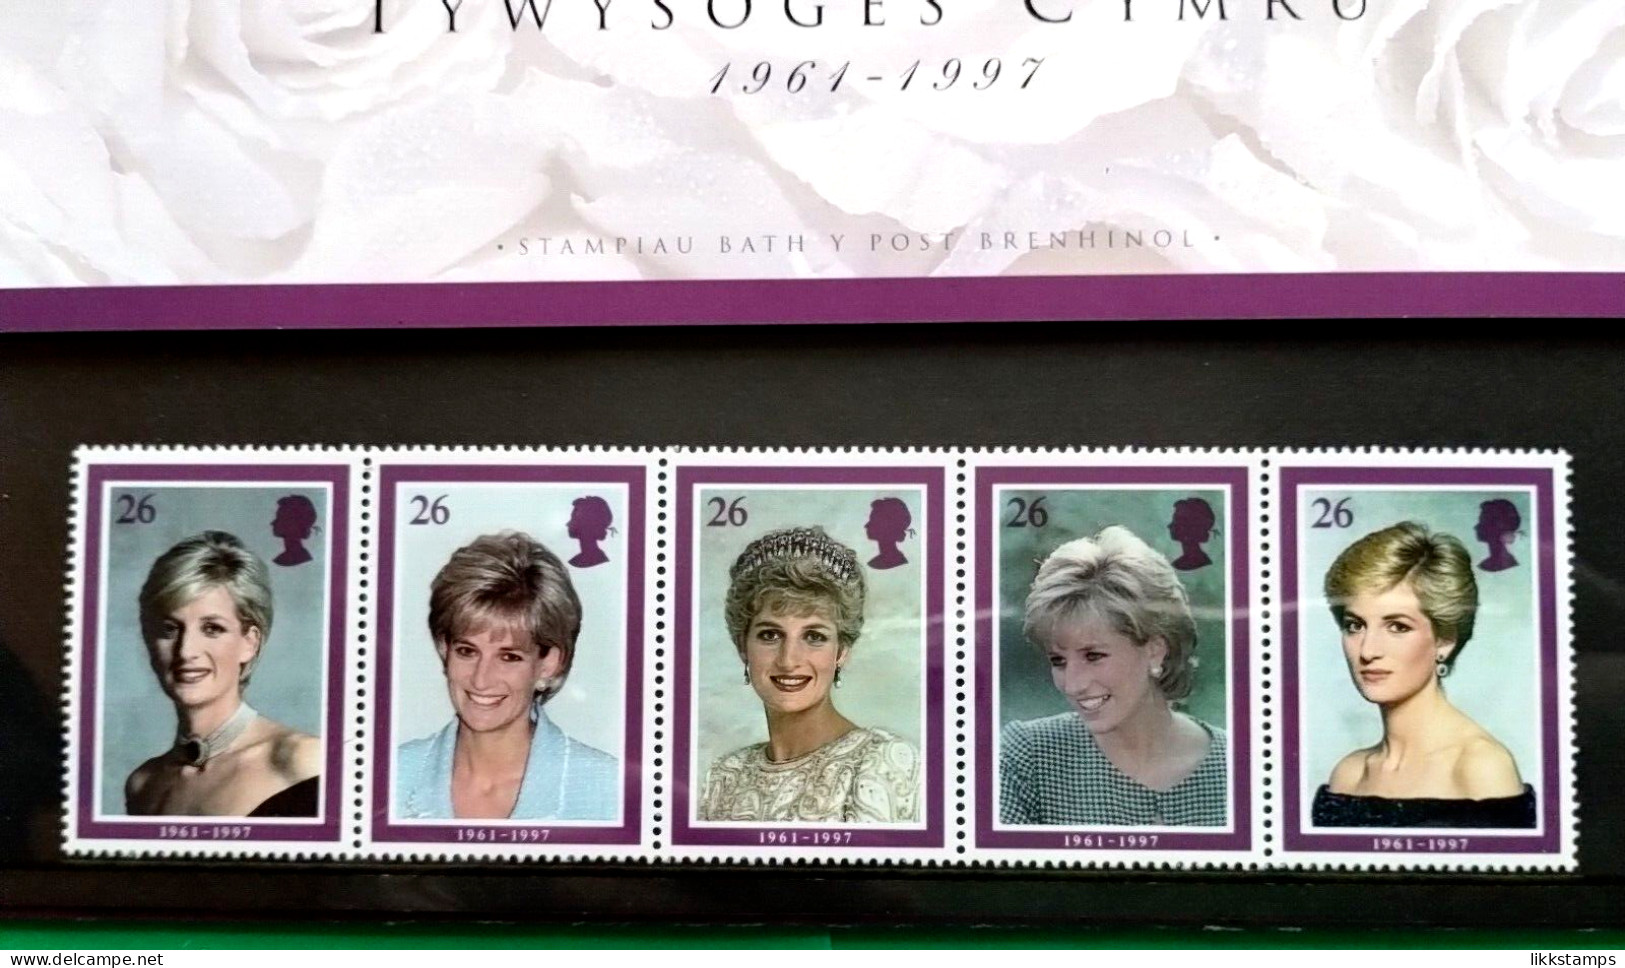 1998 'WELSH', DIANA, PRINCESS OF WALES COMMEMORATION PRESENTATION PACK.(C) #03257 - Presentation Packs